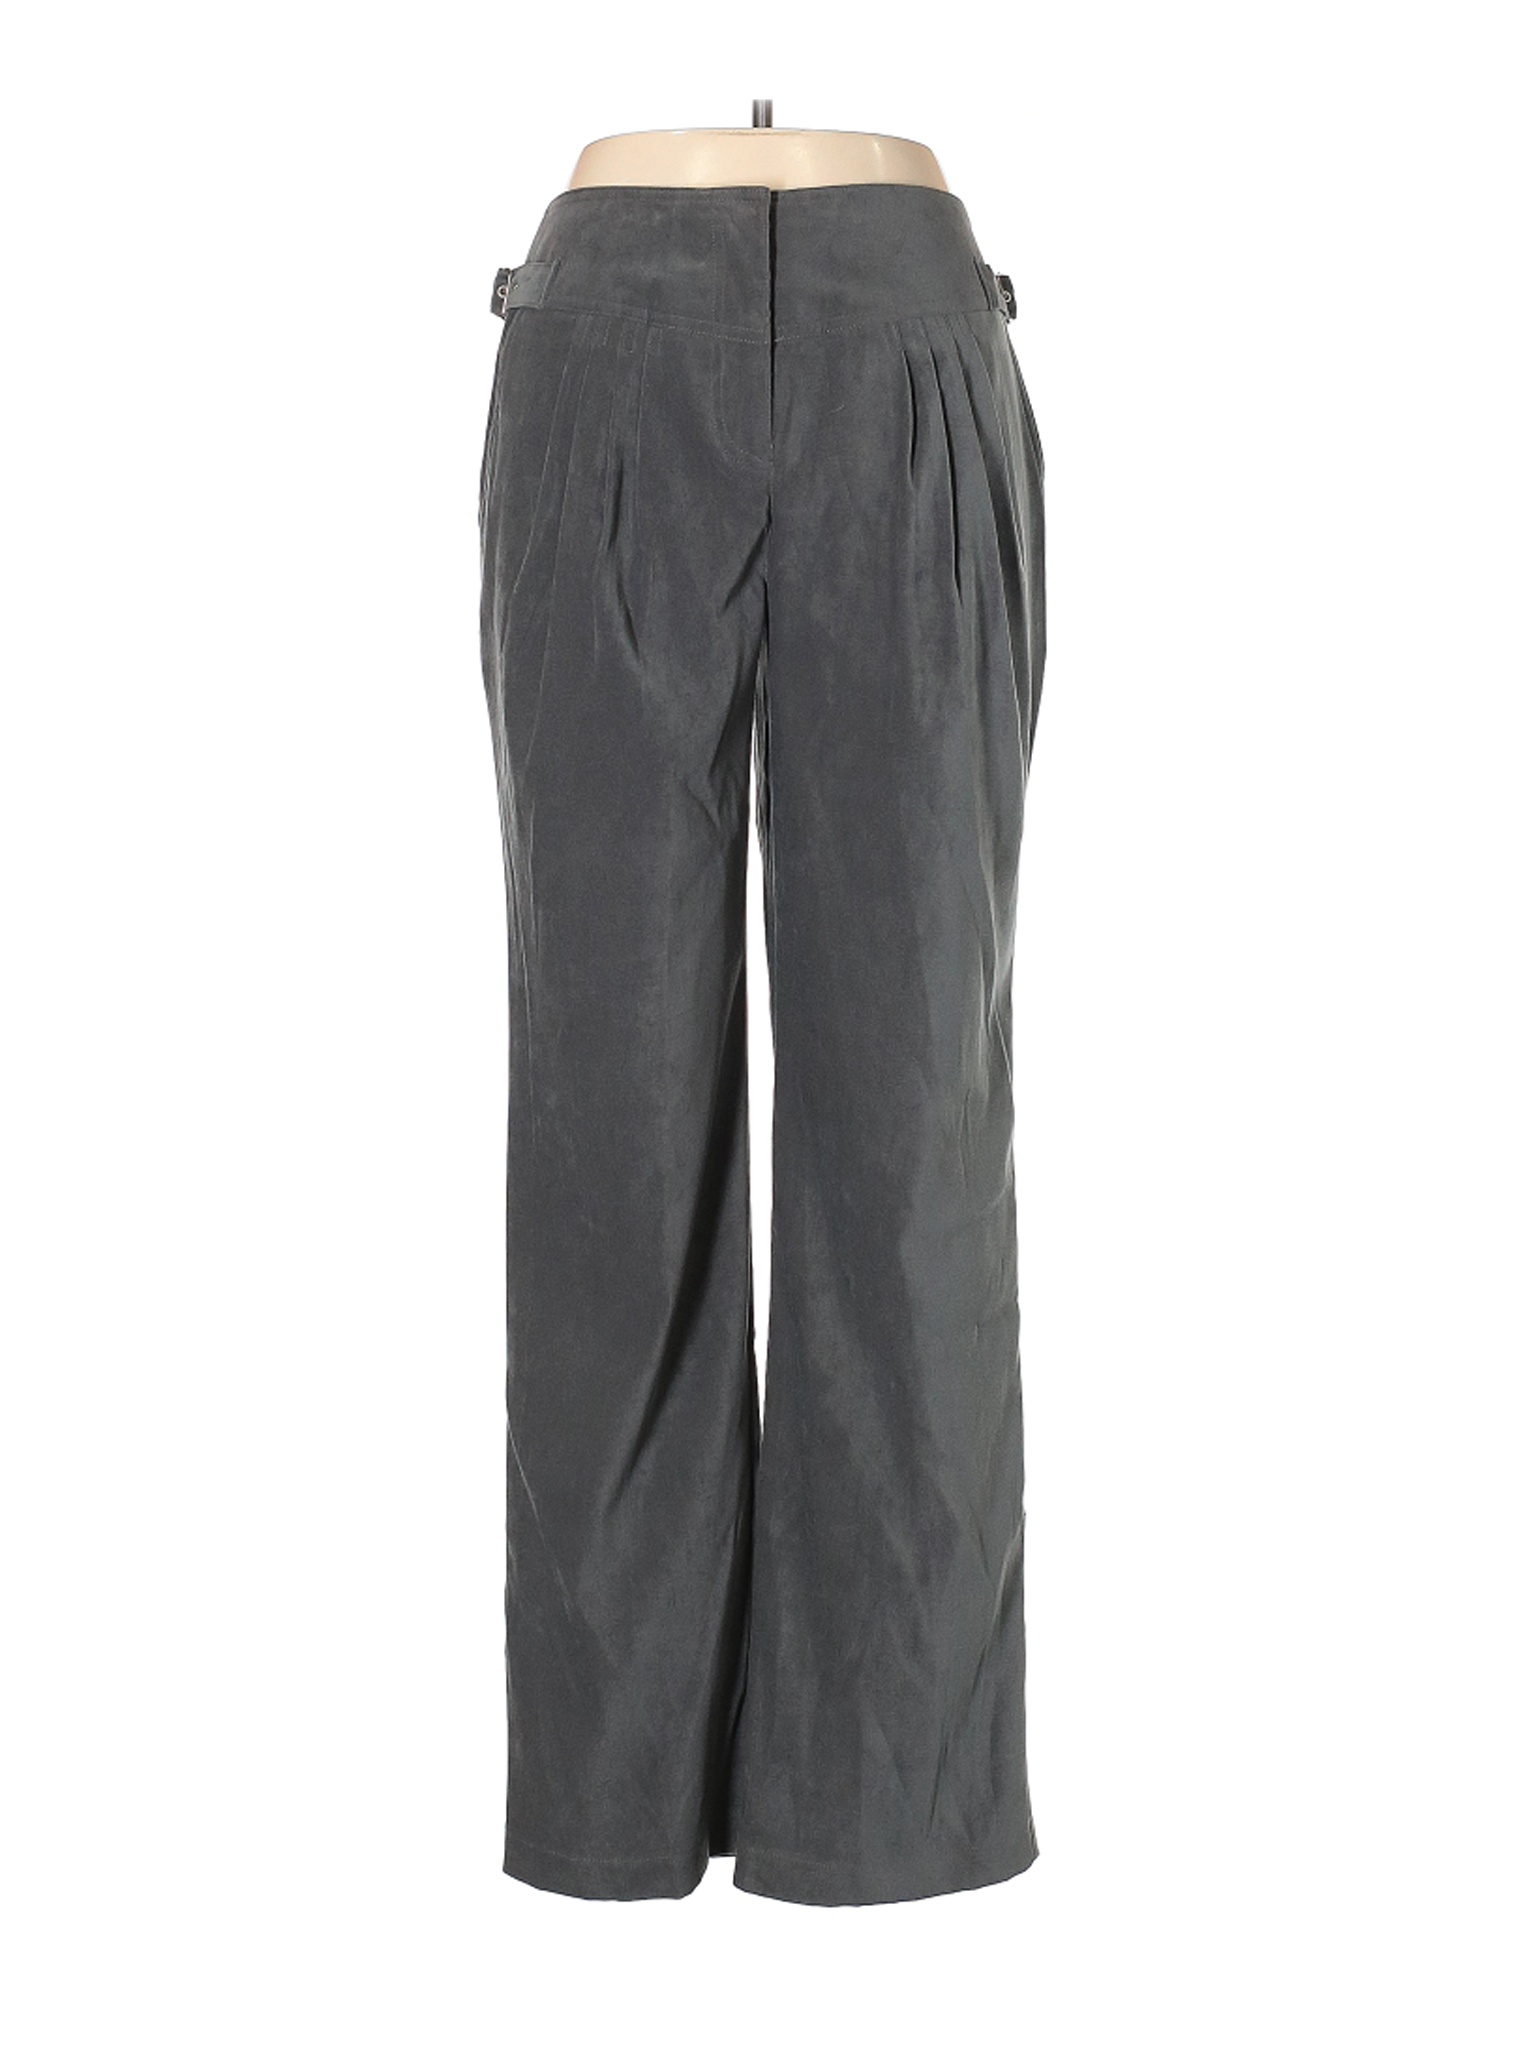 Together Women Gray Casual Pants 10 | eBay